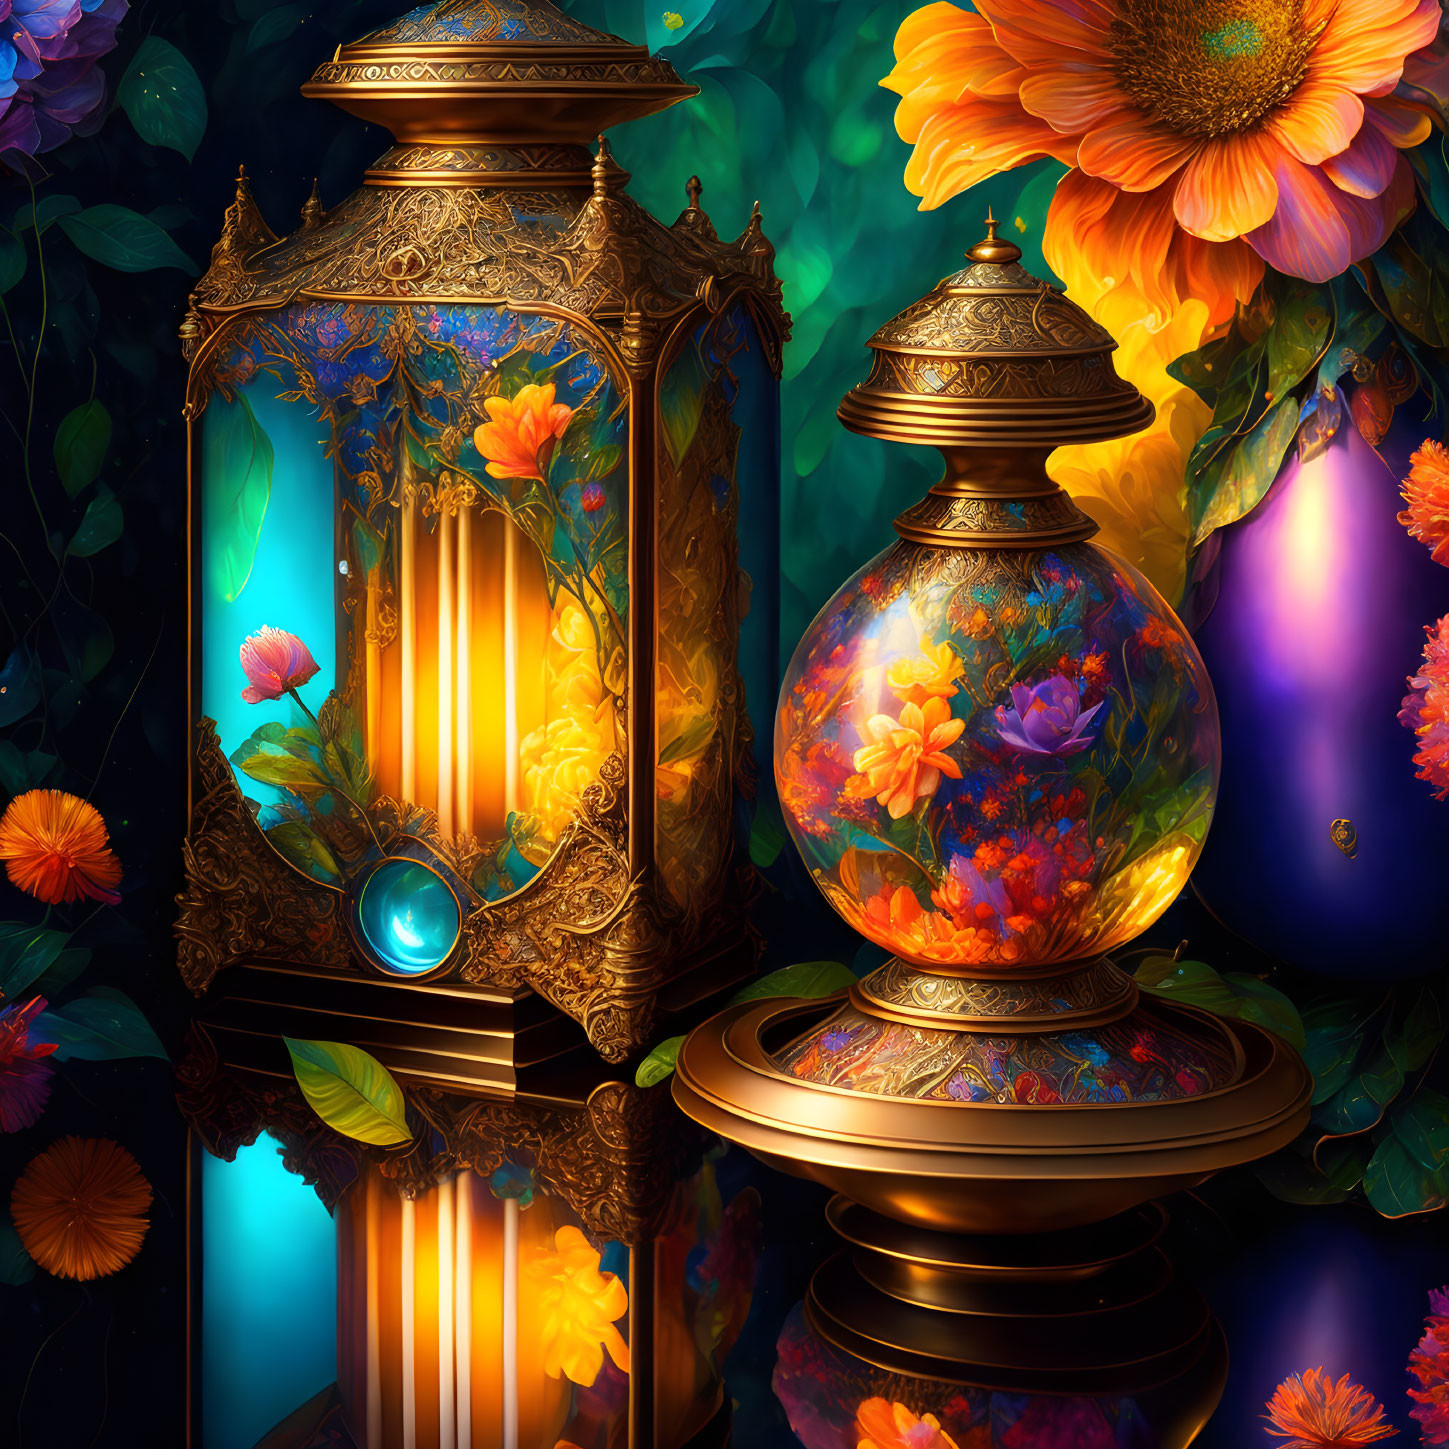 Ornate lantern and floral vase with vibrant flowers and mystical glow